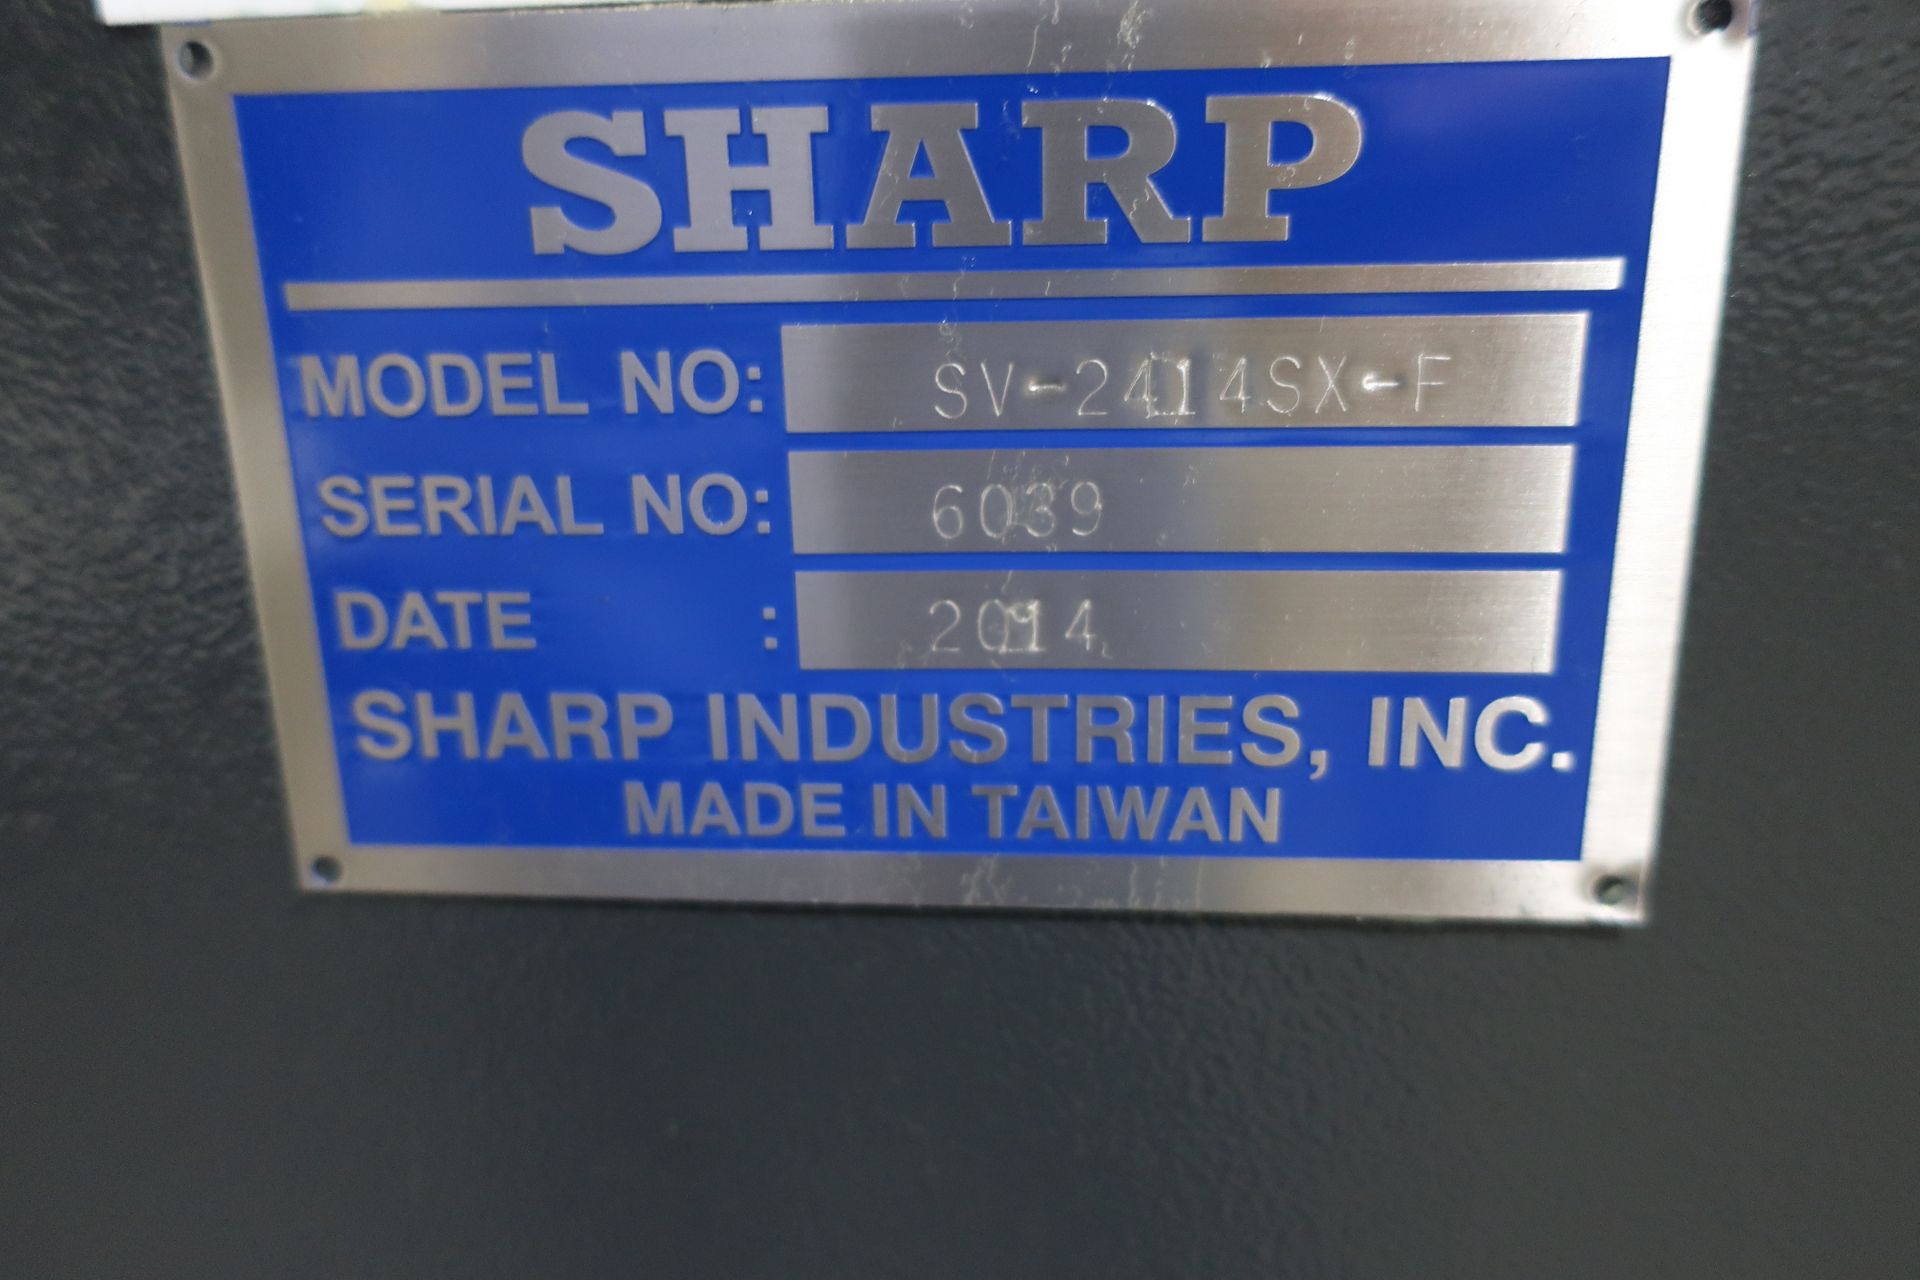 SHARP SV-2414SX-F CNC 3-AXIS VERTICAL MACHINING CENTER, S/N 6039, NEW 2014 - Image 12 of 12